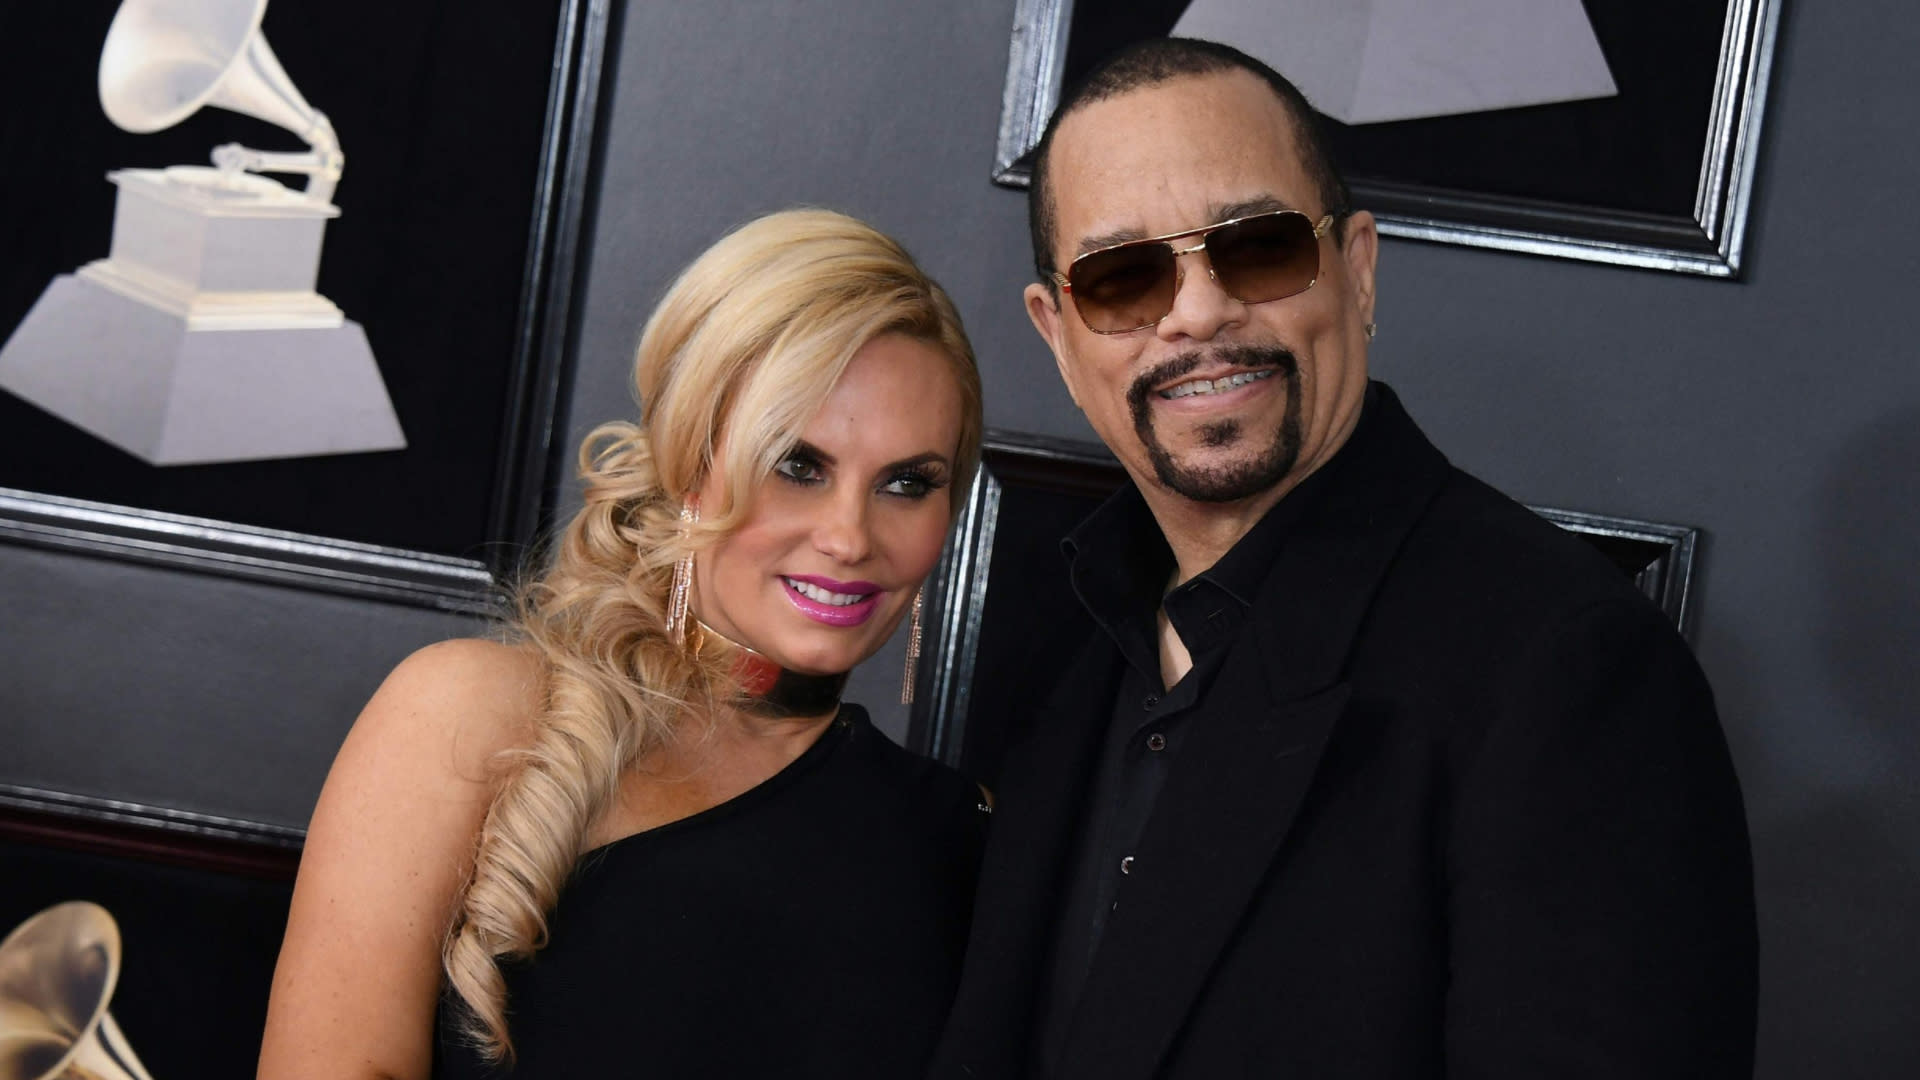 Ice-T Says 7-Year-Old Daughter 'Still' Sleeps In Parents' Bed